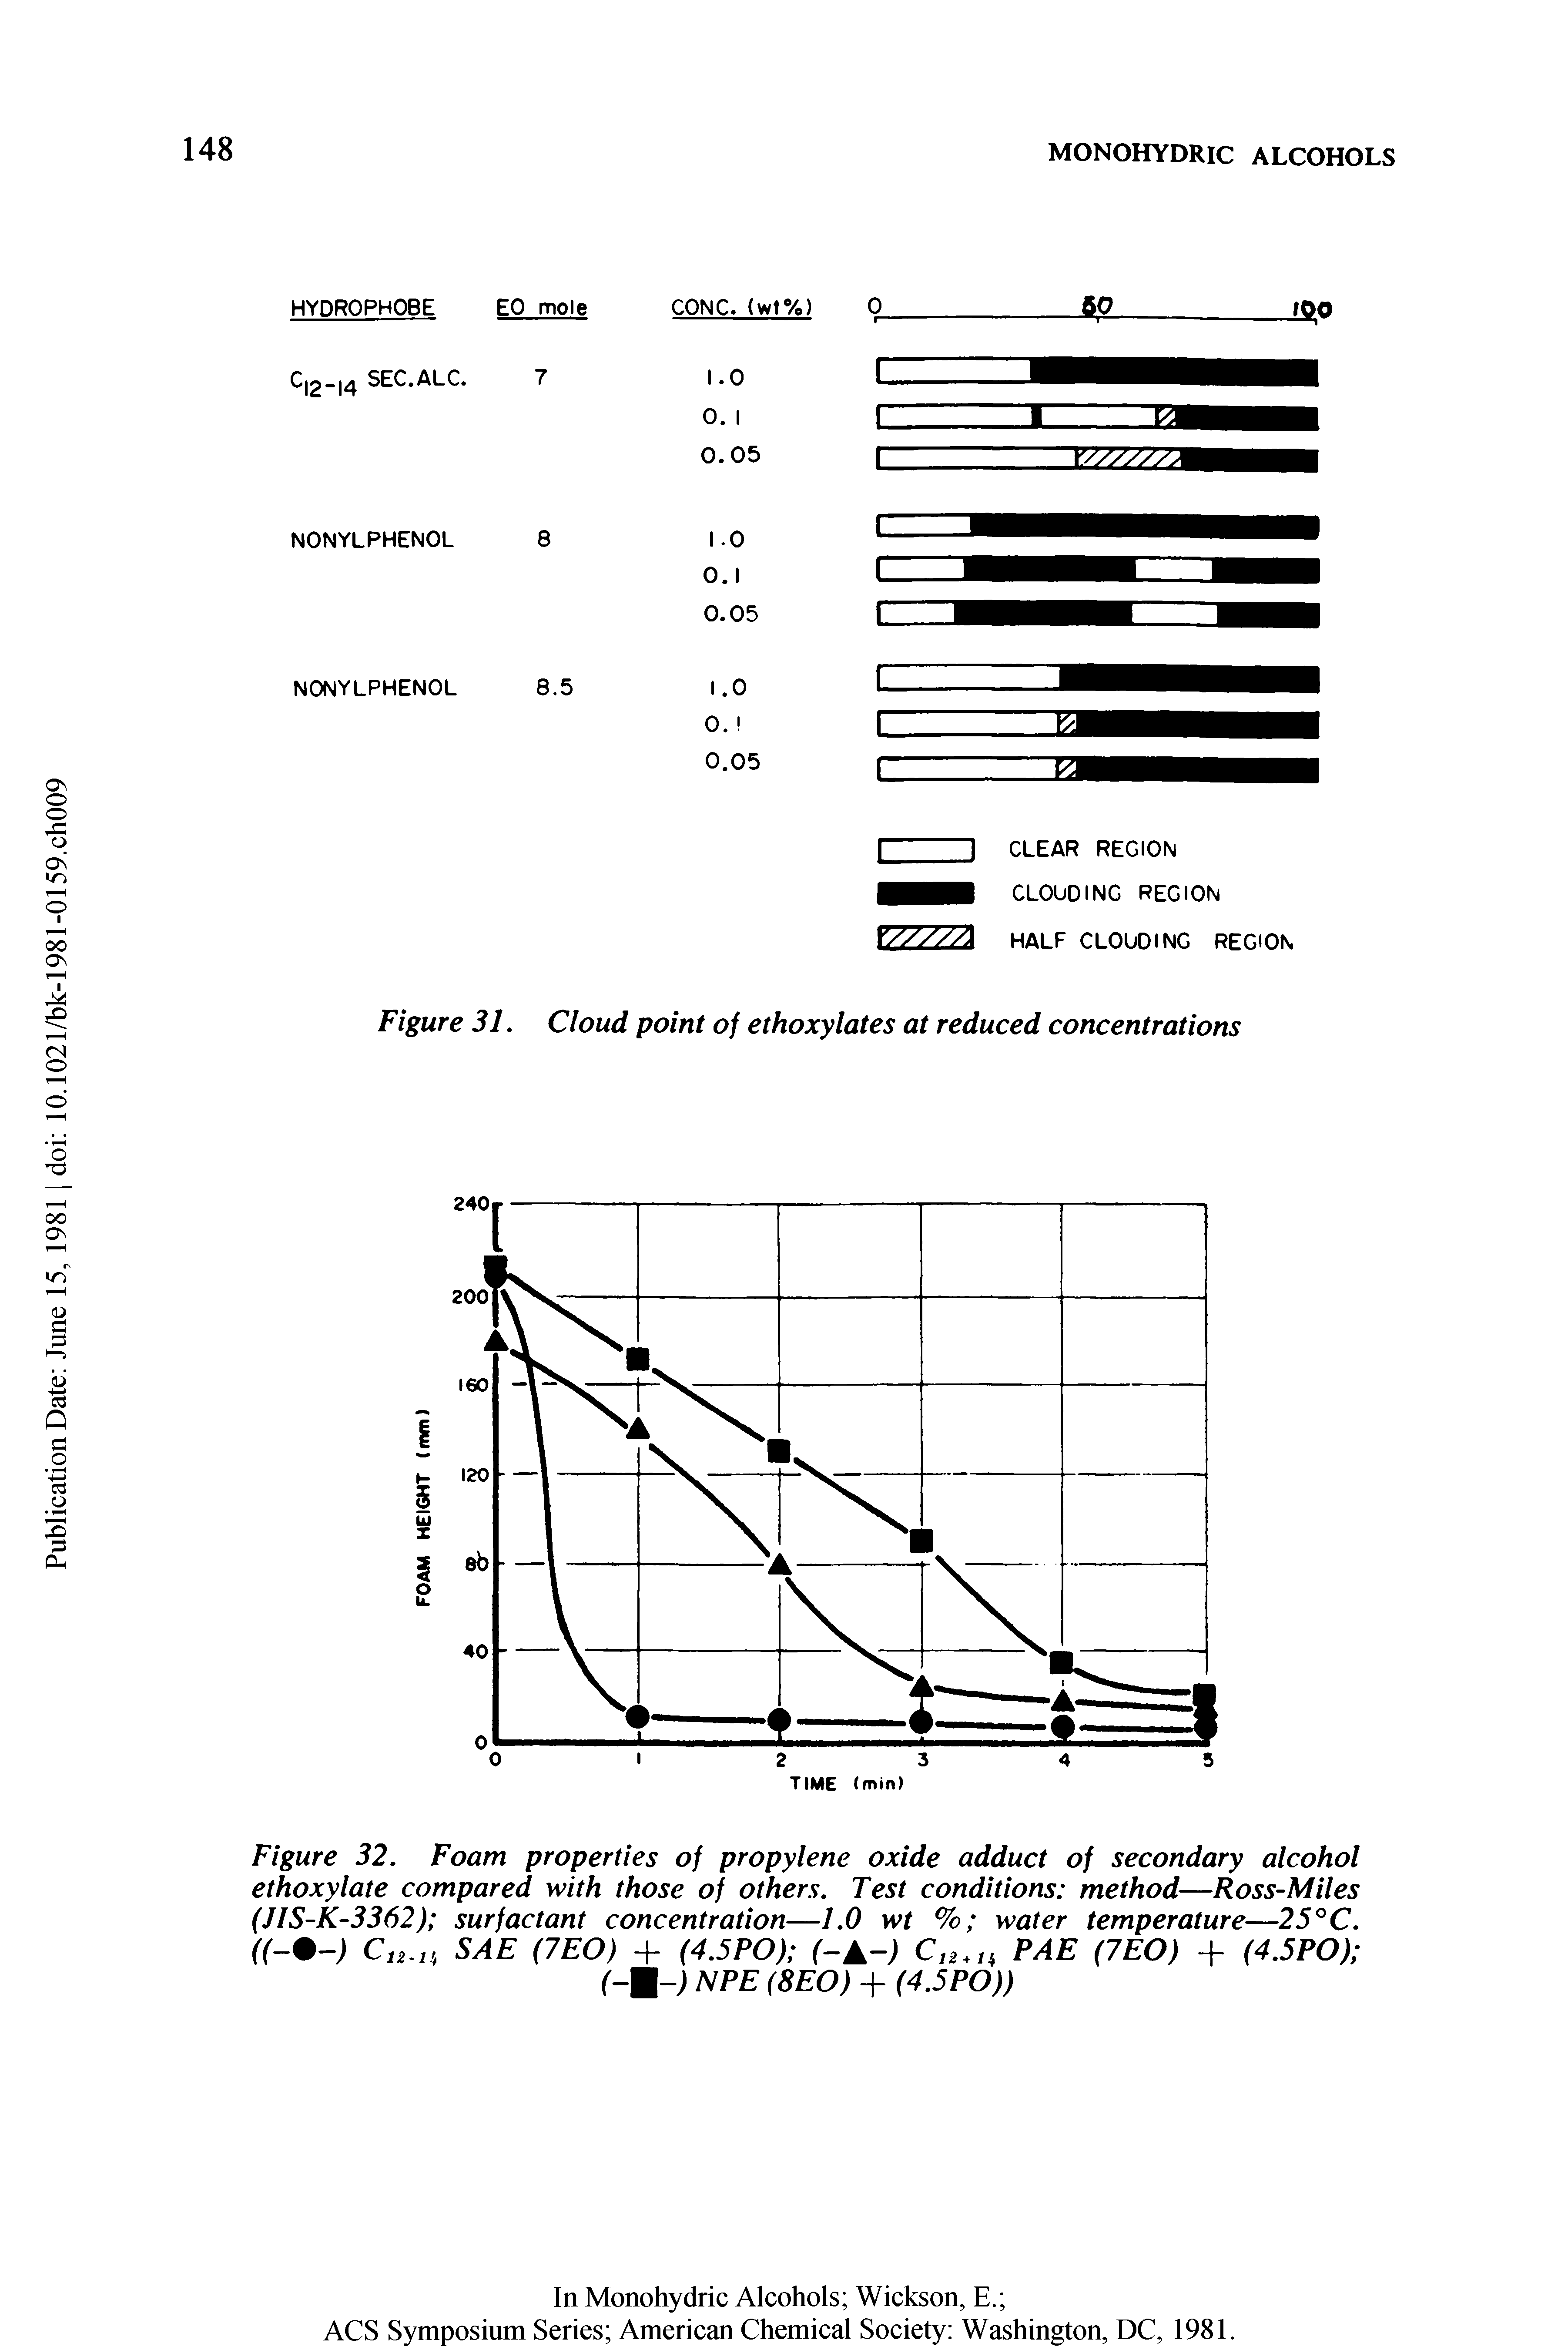 Figure 32. Foam properties of propylene oxide adduct of secondary alcohol ethoxylate compared with those of others. Test conditions method—Ross-Miles (JIS-K-3362) surfactant concentration—1.0 wt % water temperature—25°C. ((- -) Cn.H SAE (7EO) + (4.5PO) (-1-) CI2 + Ii PAE (7EO) + (4.5PO) (-U-) HPE (8EO) + (4.5PO))...